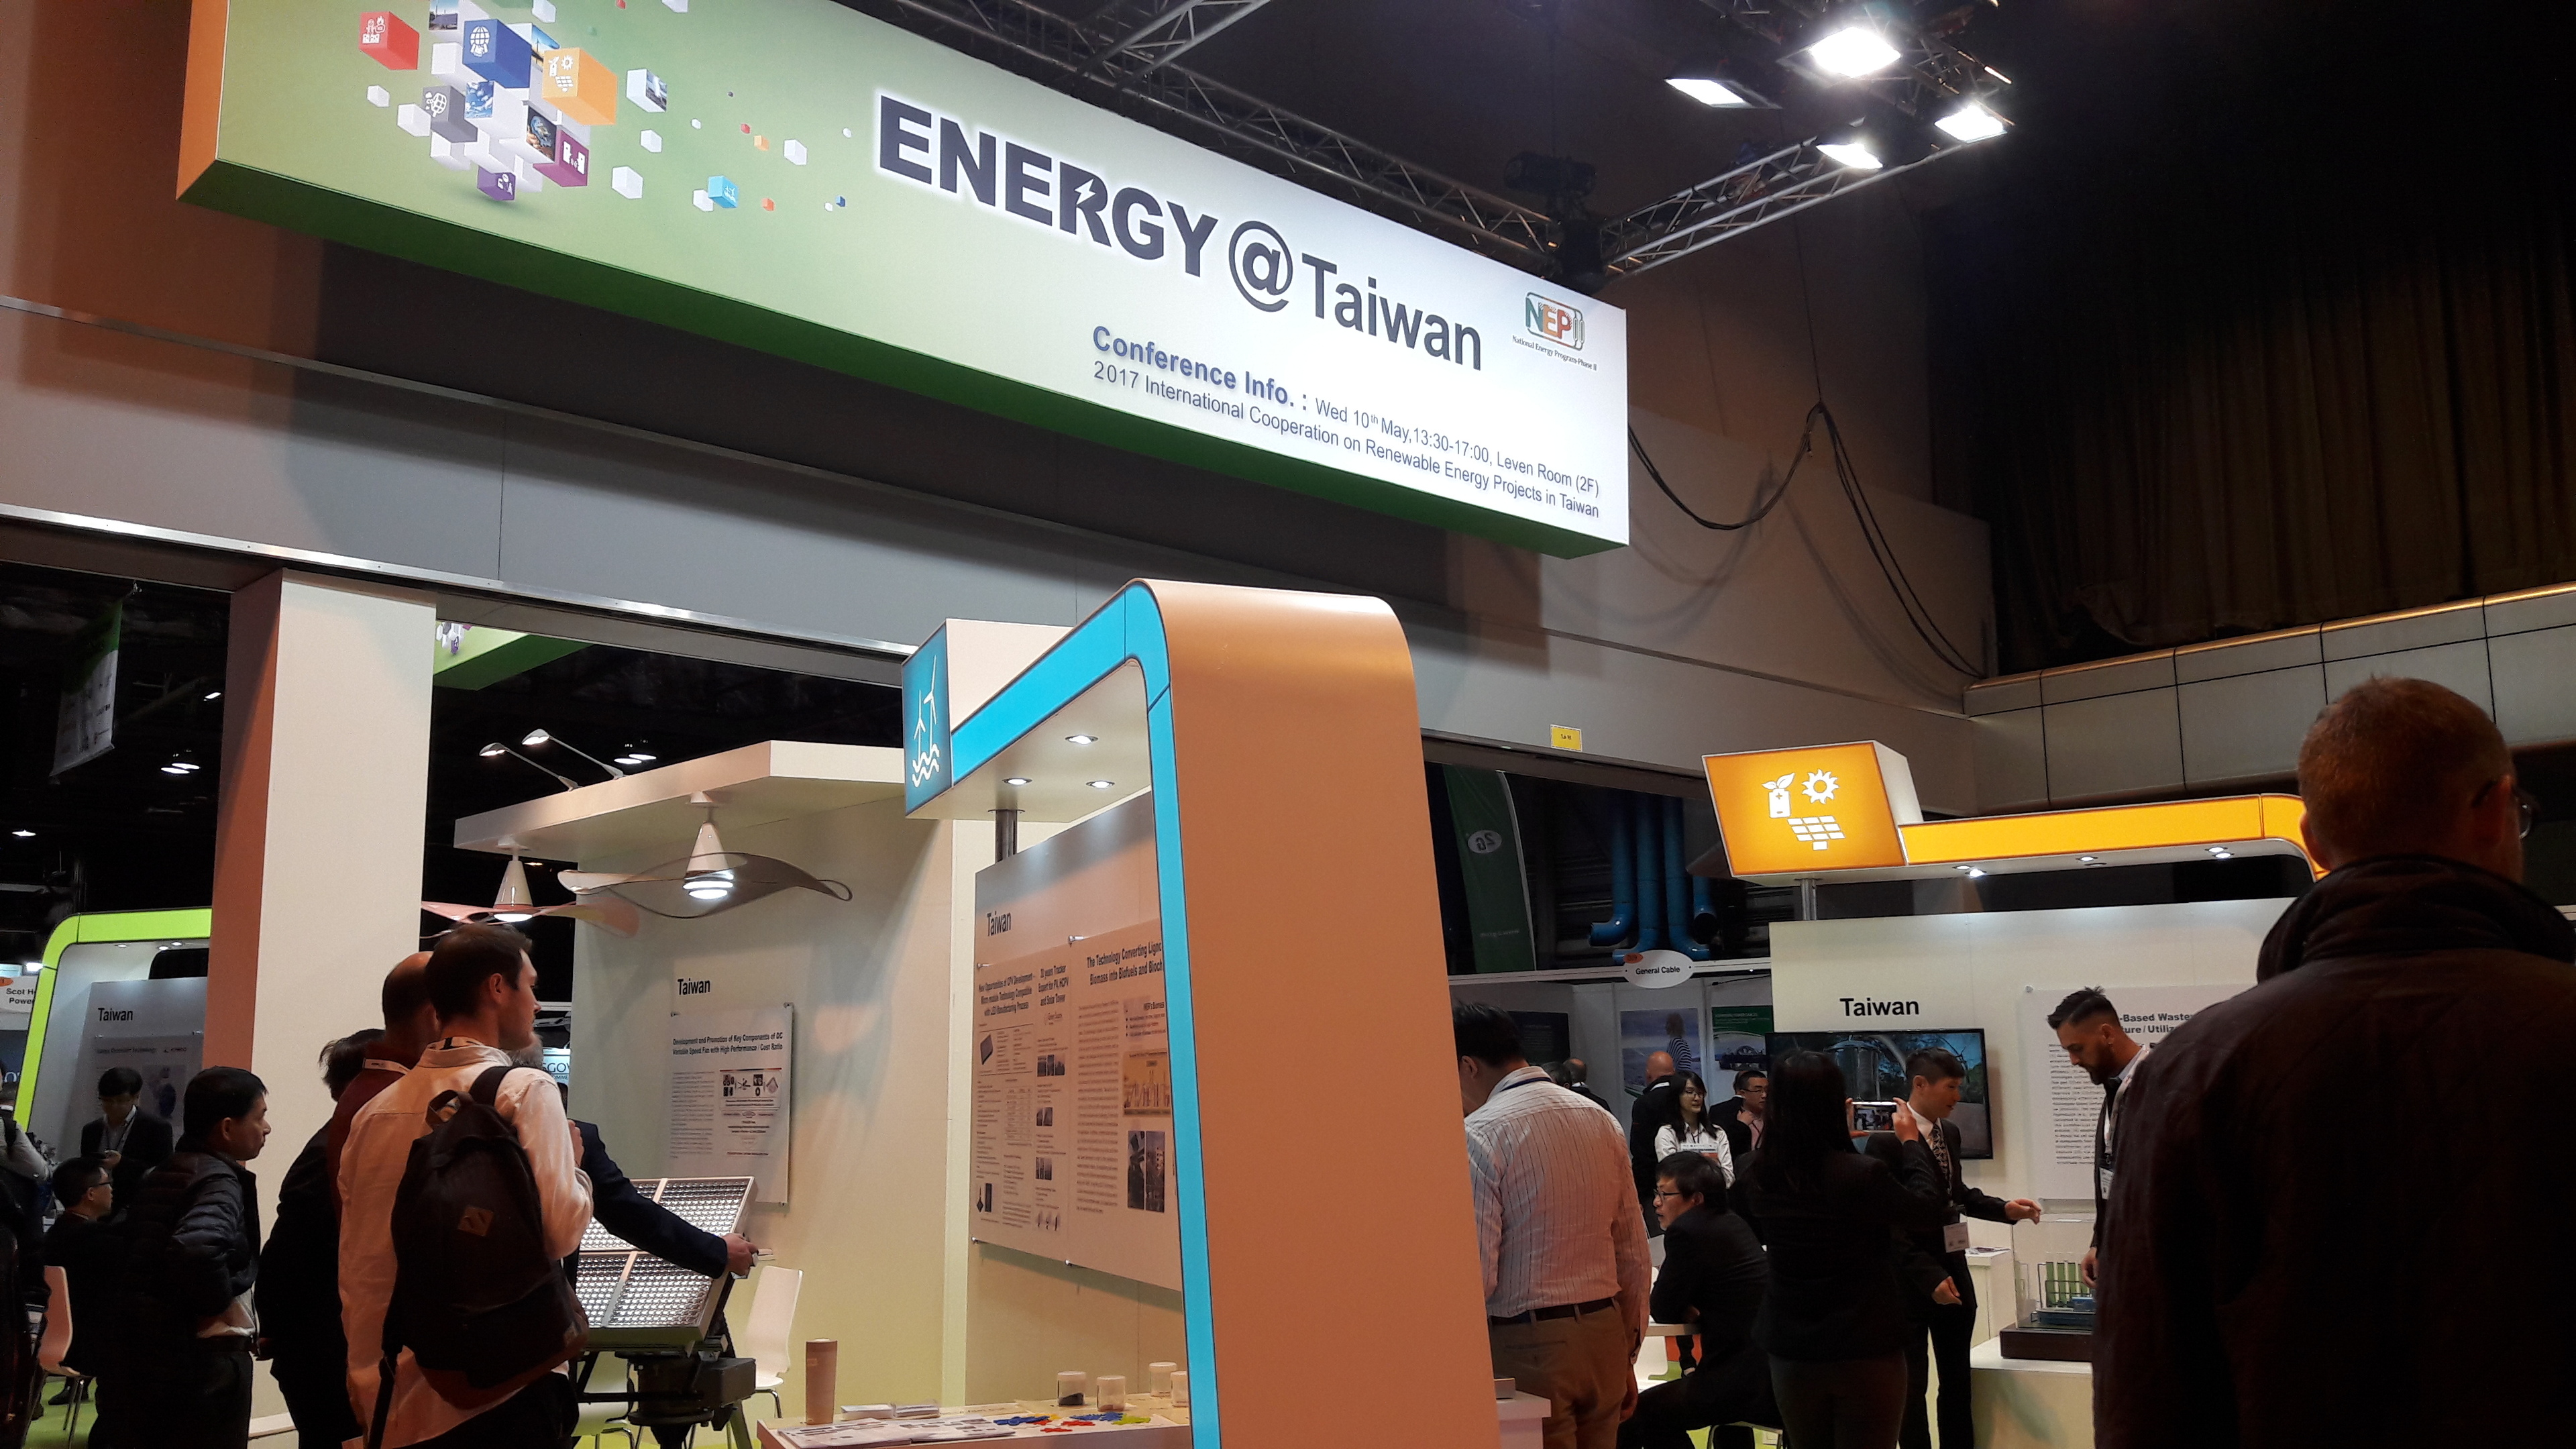 The Energy @ Taiwan stand at All Energy